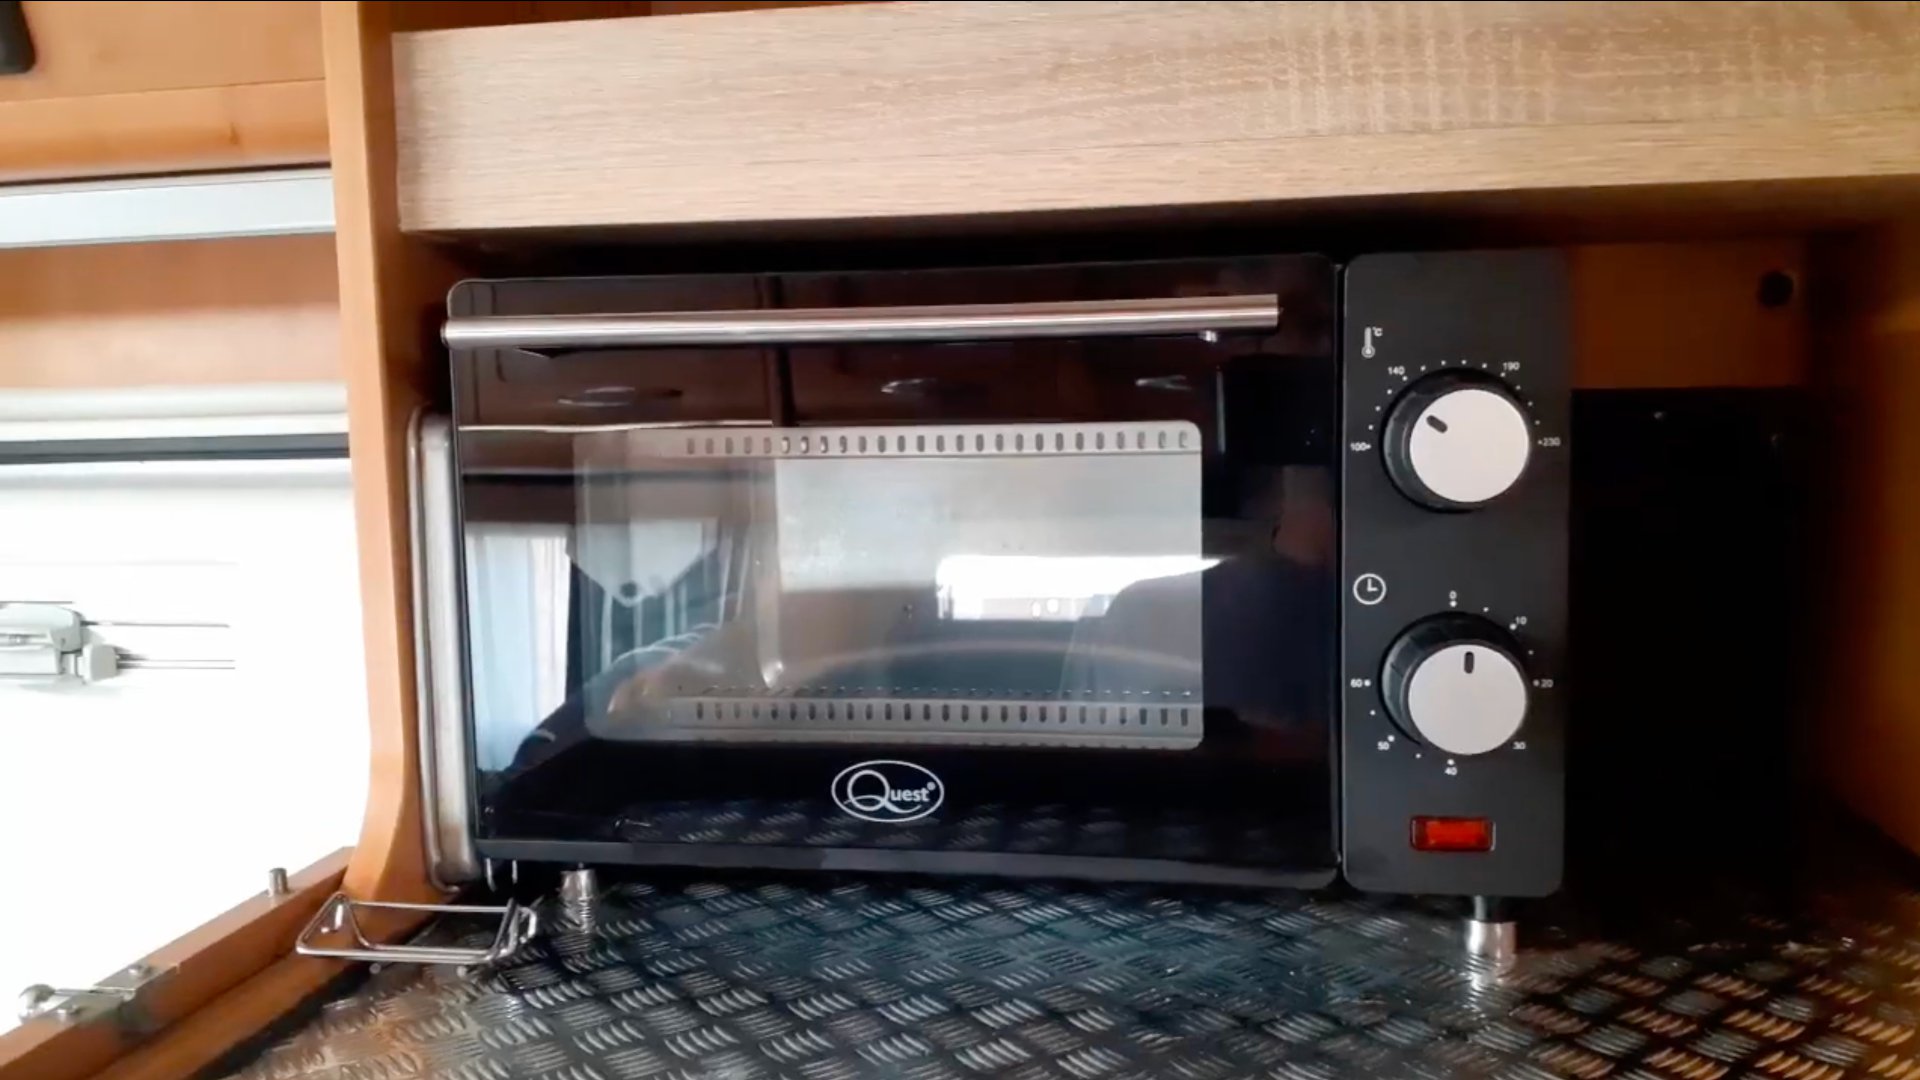 Electric toaster oven in motorhome